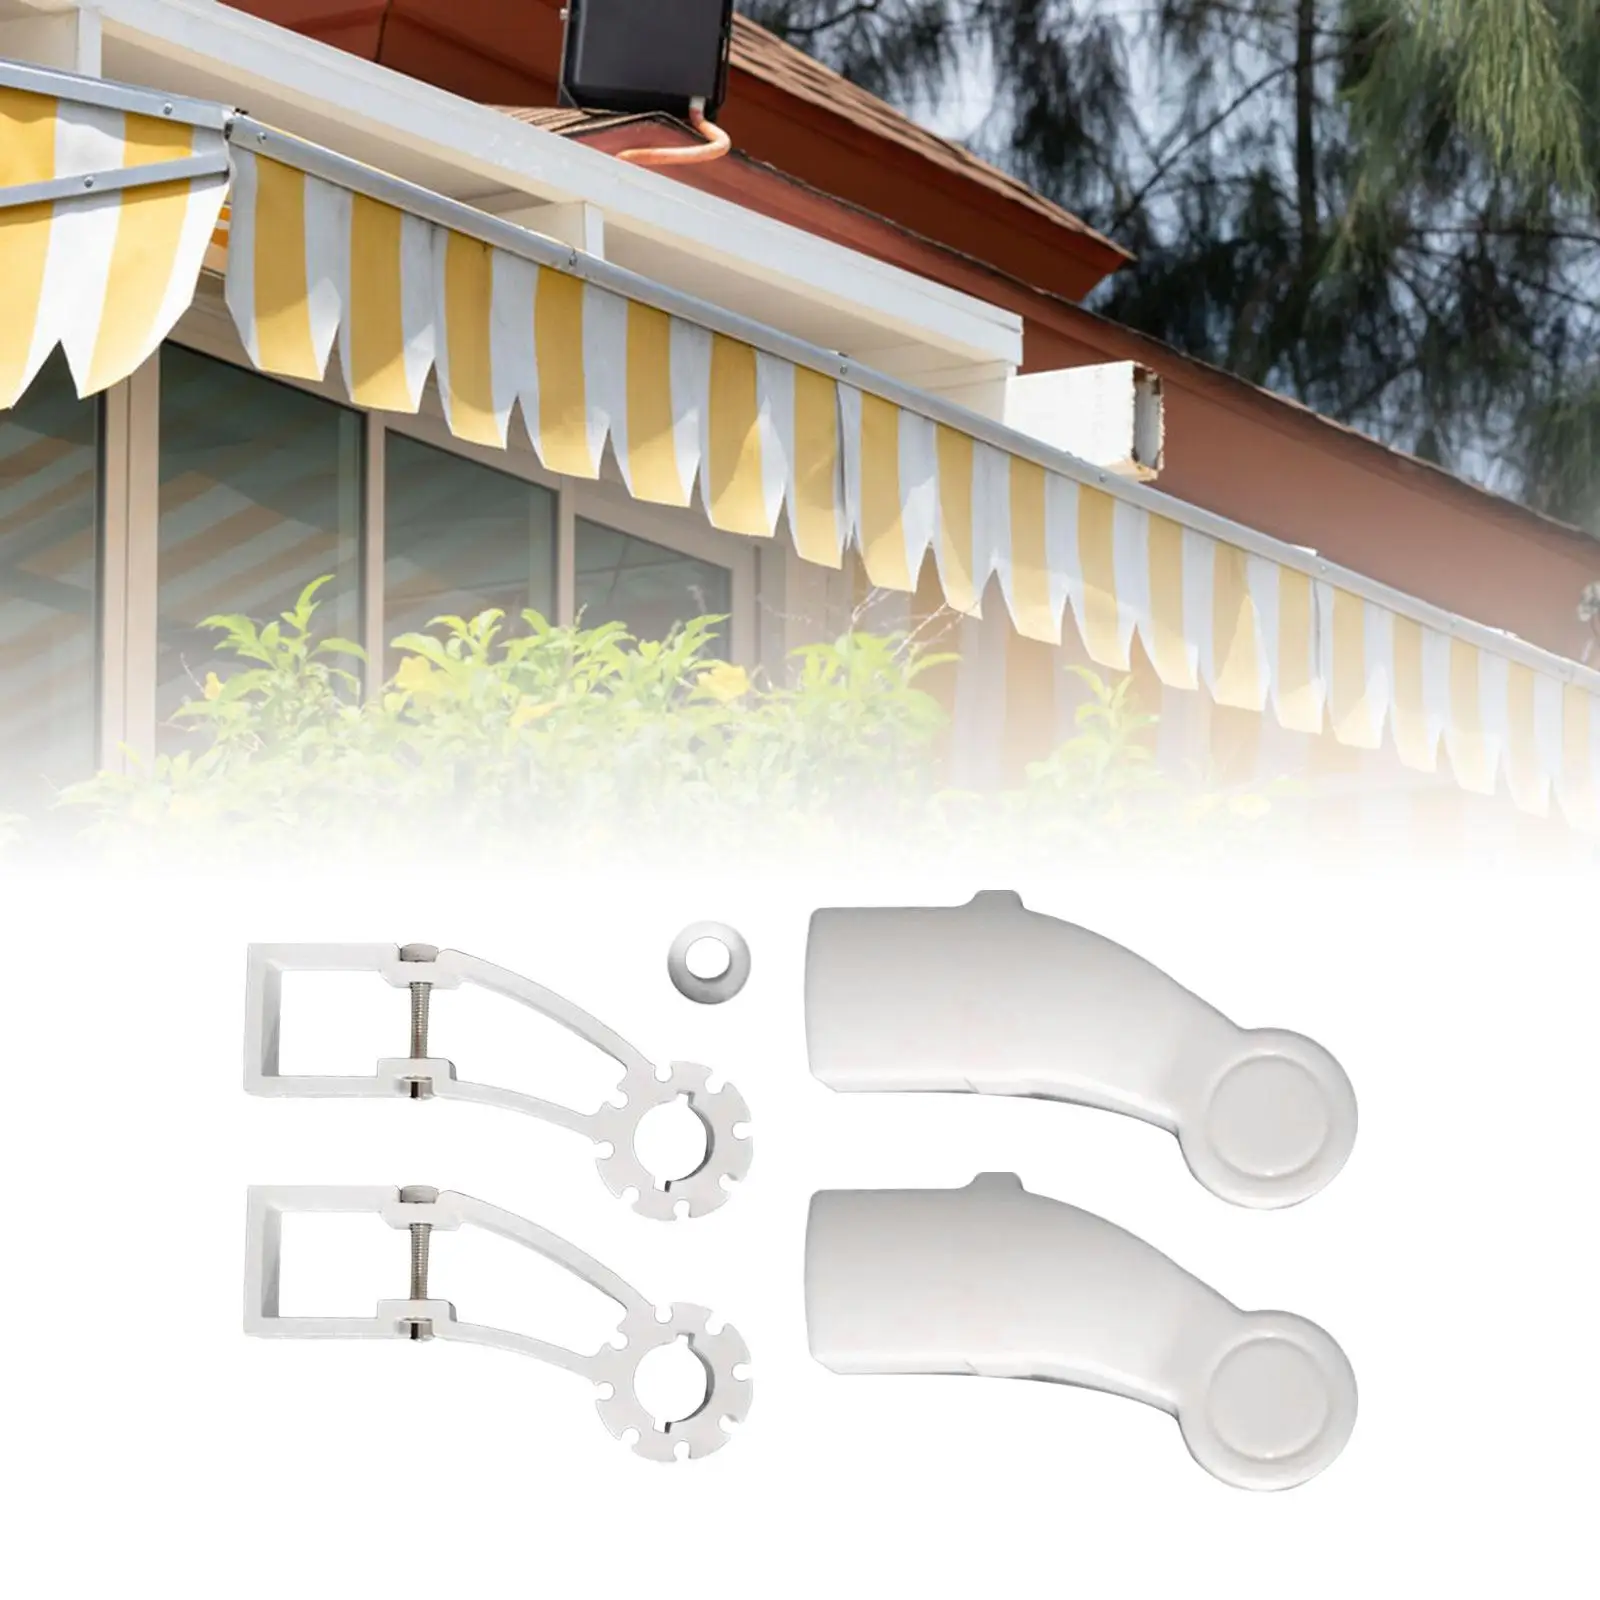 Awning Brackets 40mm Square Tube White Mounting Brackets Aluminum Alloy Easy to Install Replacement for RV Camper Trailer